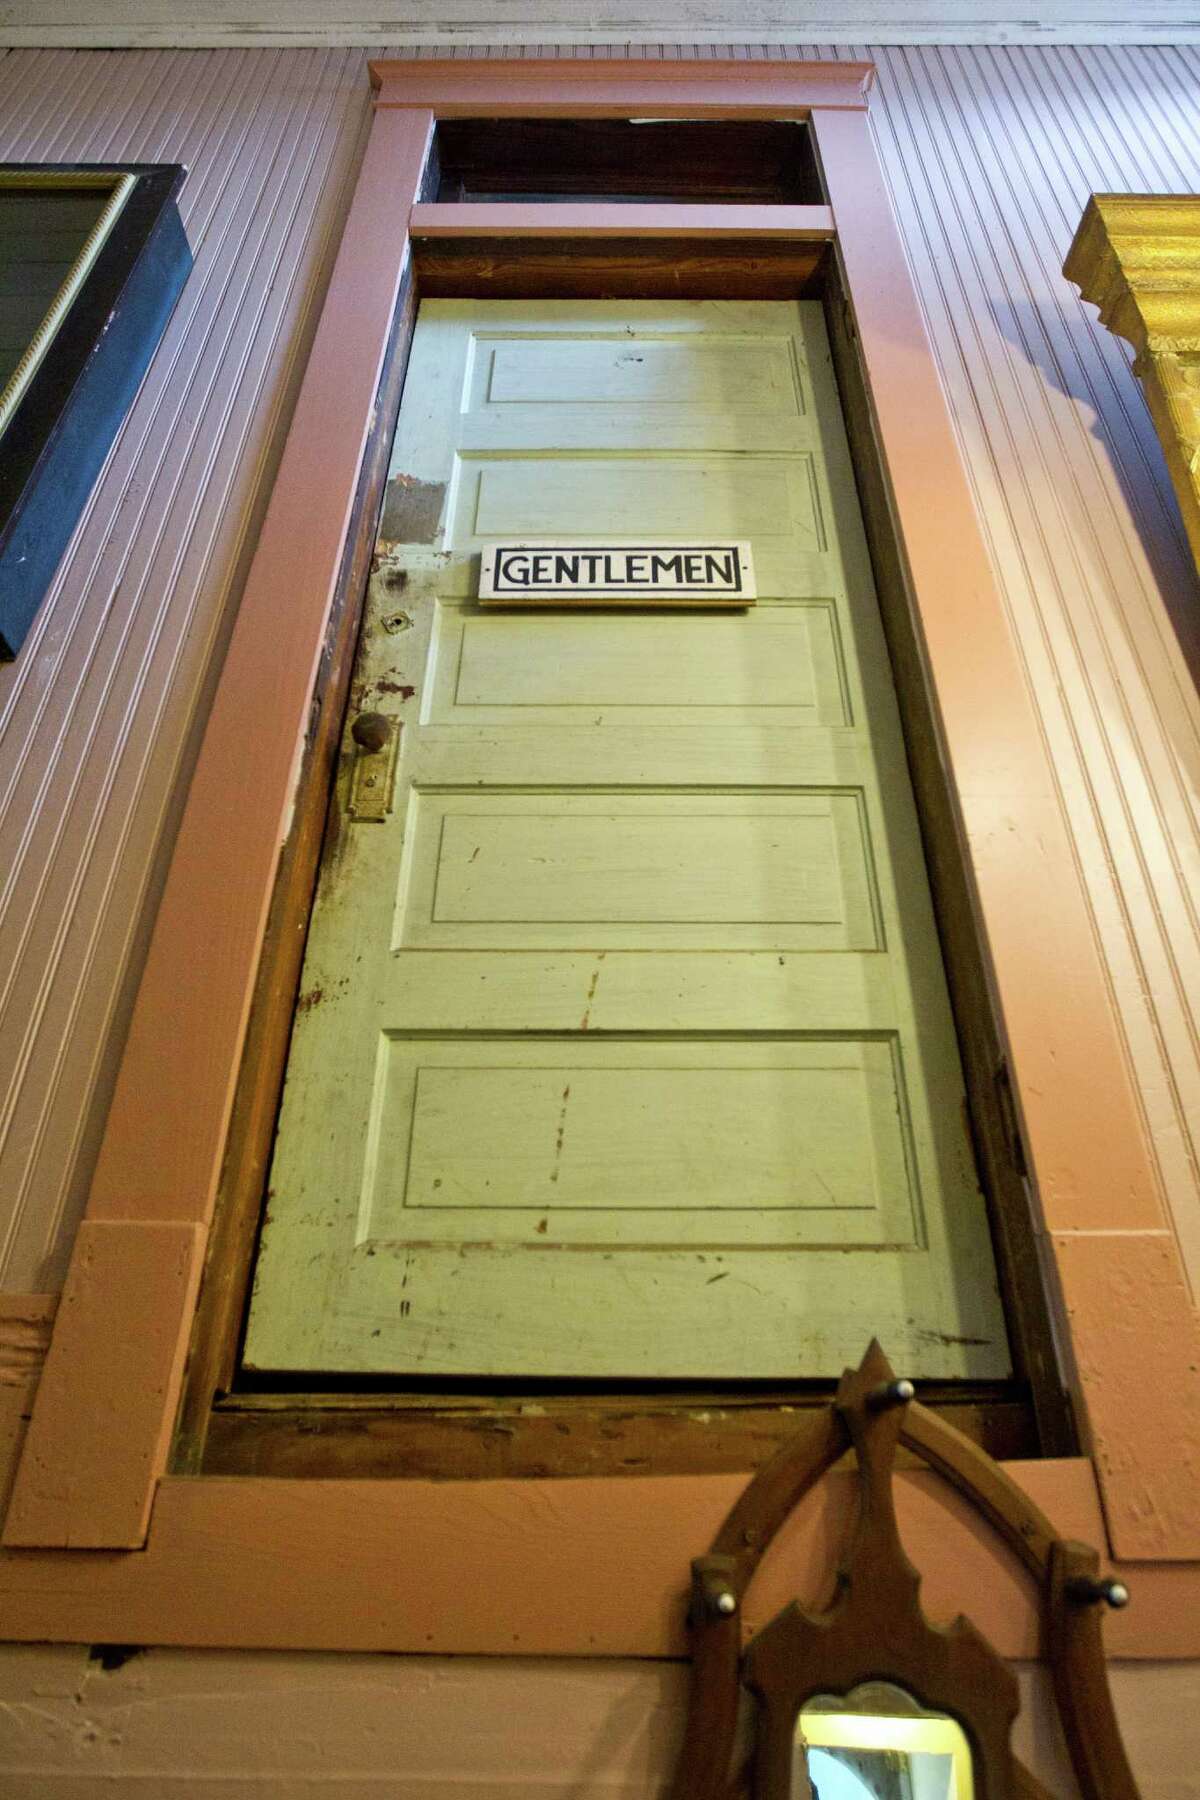 The mens bathroom, which now leads to a set of stairs built in the 1960's was for the Johns who visited the oleander Hotel when it was a brothel. The building is now the Antique Warehouse, , Thursday, July 18, 2013, in Galveston. ( Nick de la Torre / Houston Chronicle )